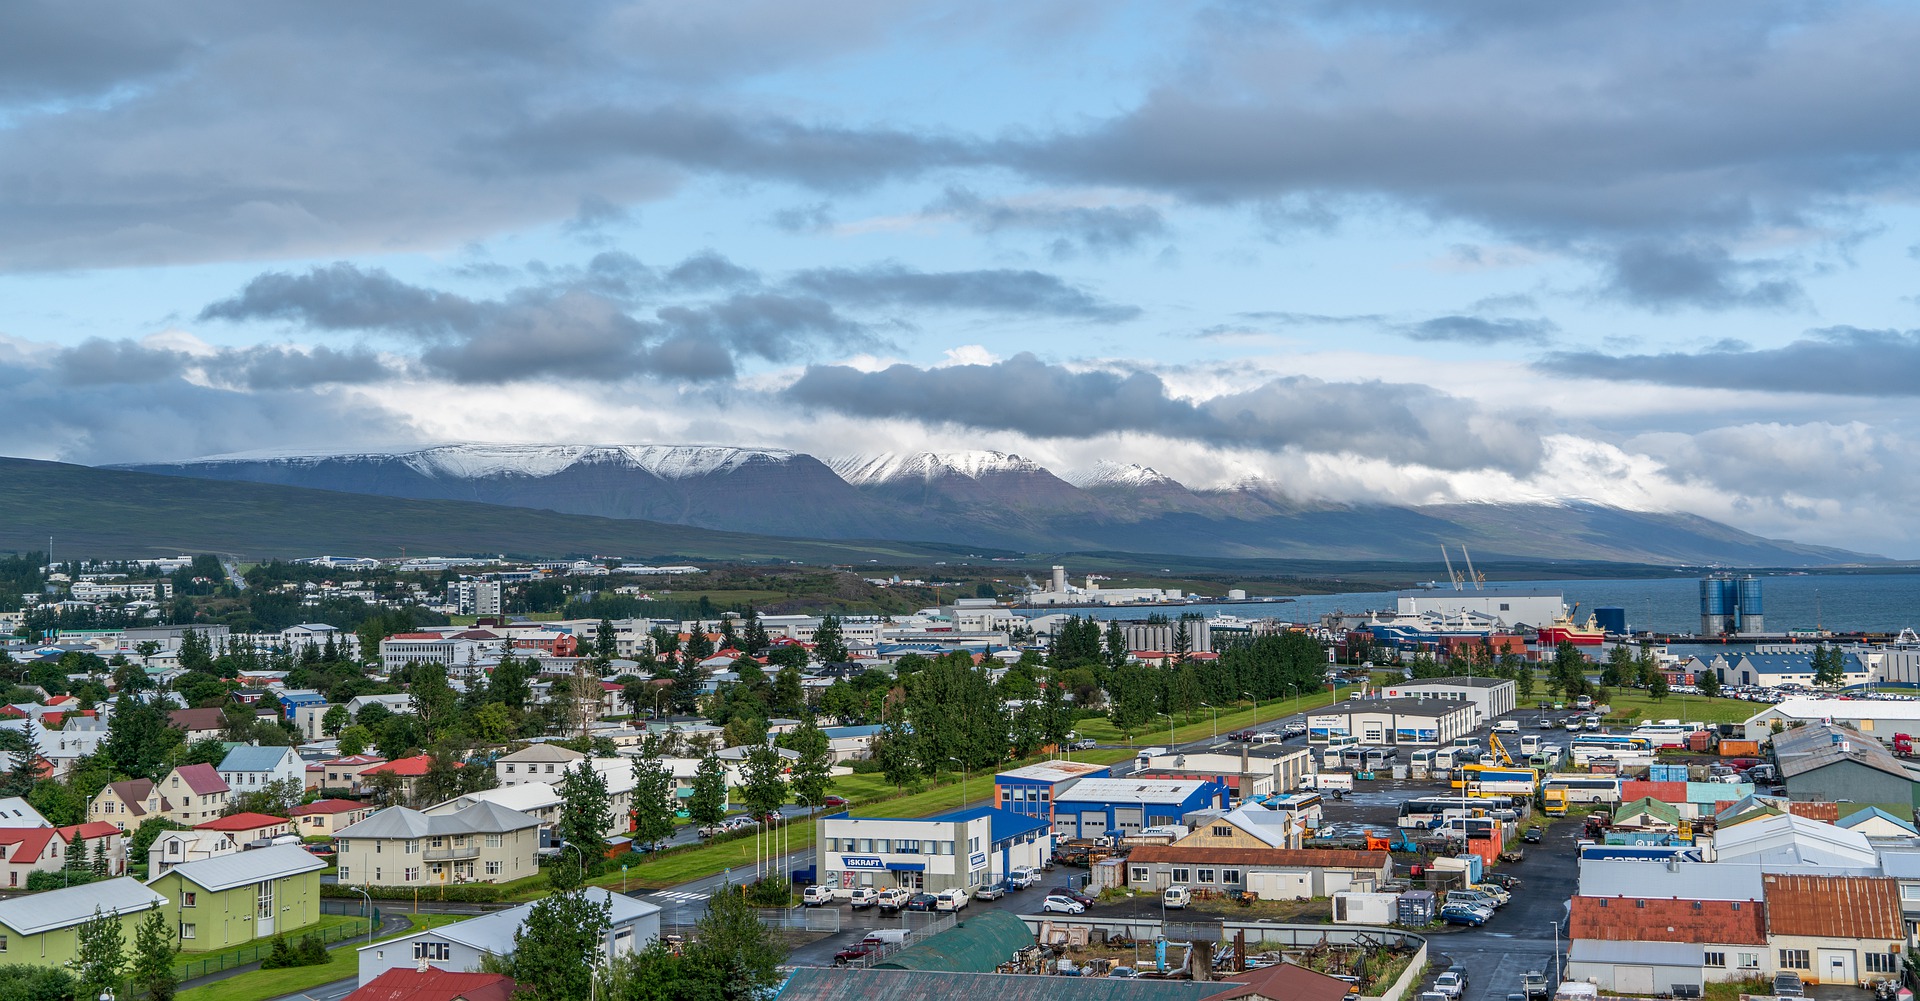 the city of akureyri with colorful houses and mountains on the background